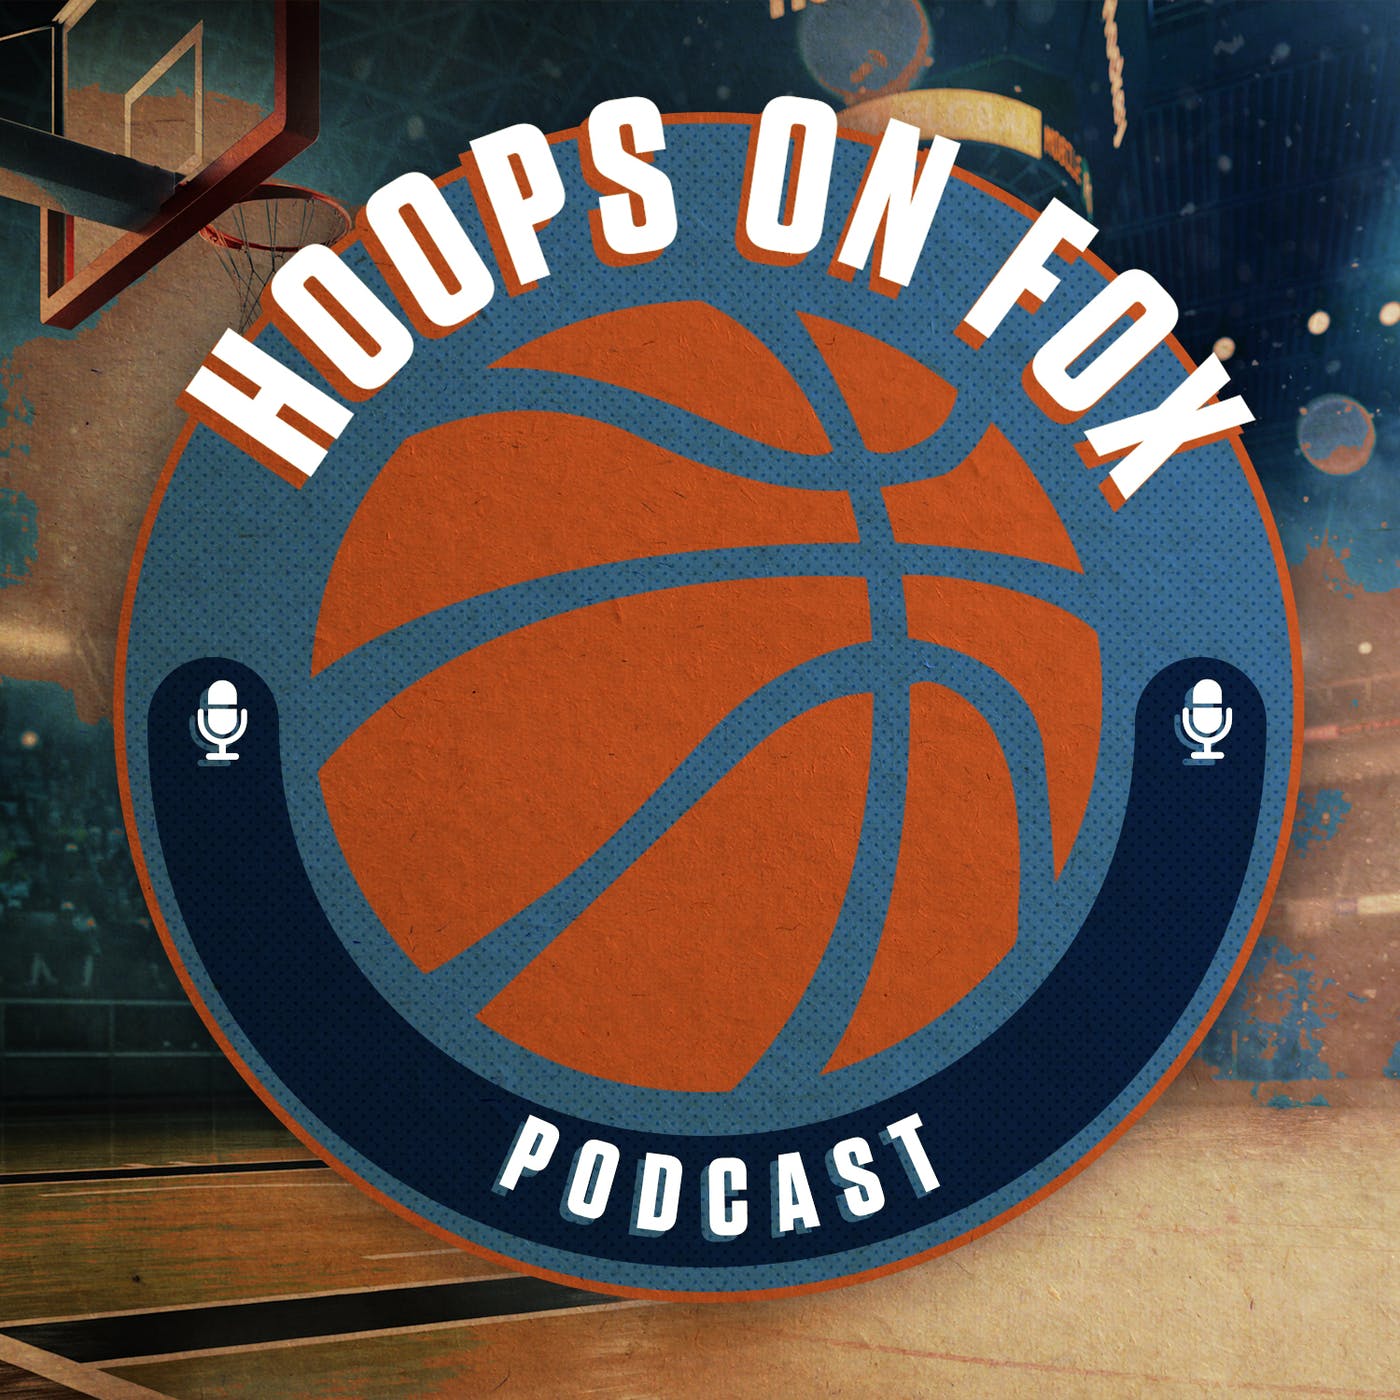 Ep. 65 - Power Swing in the East with Marcus Morris